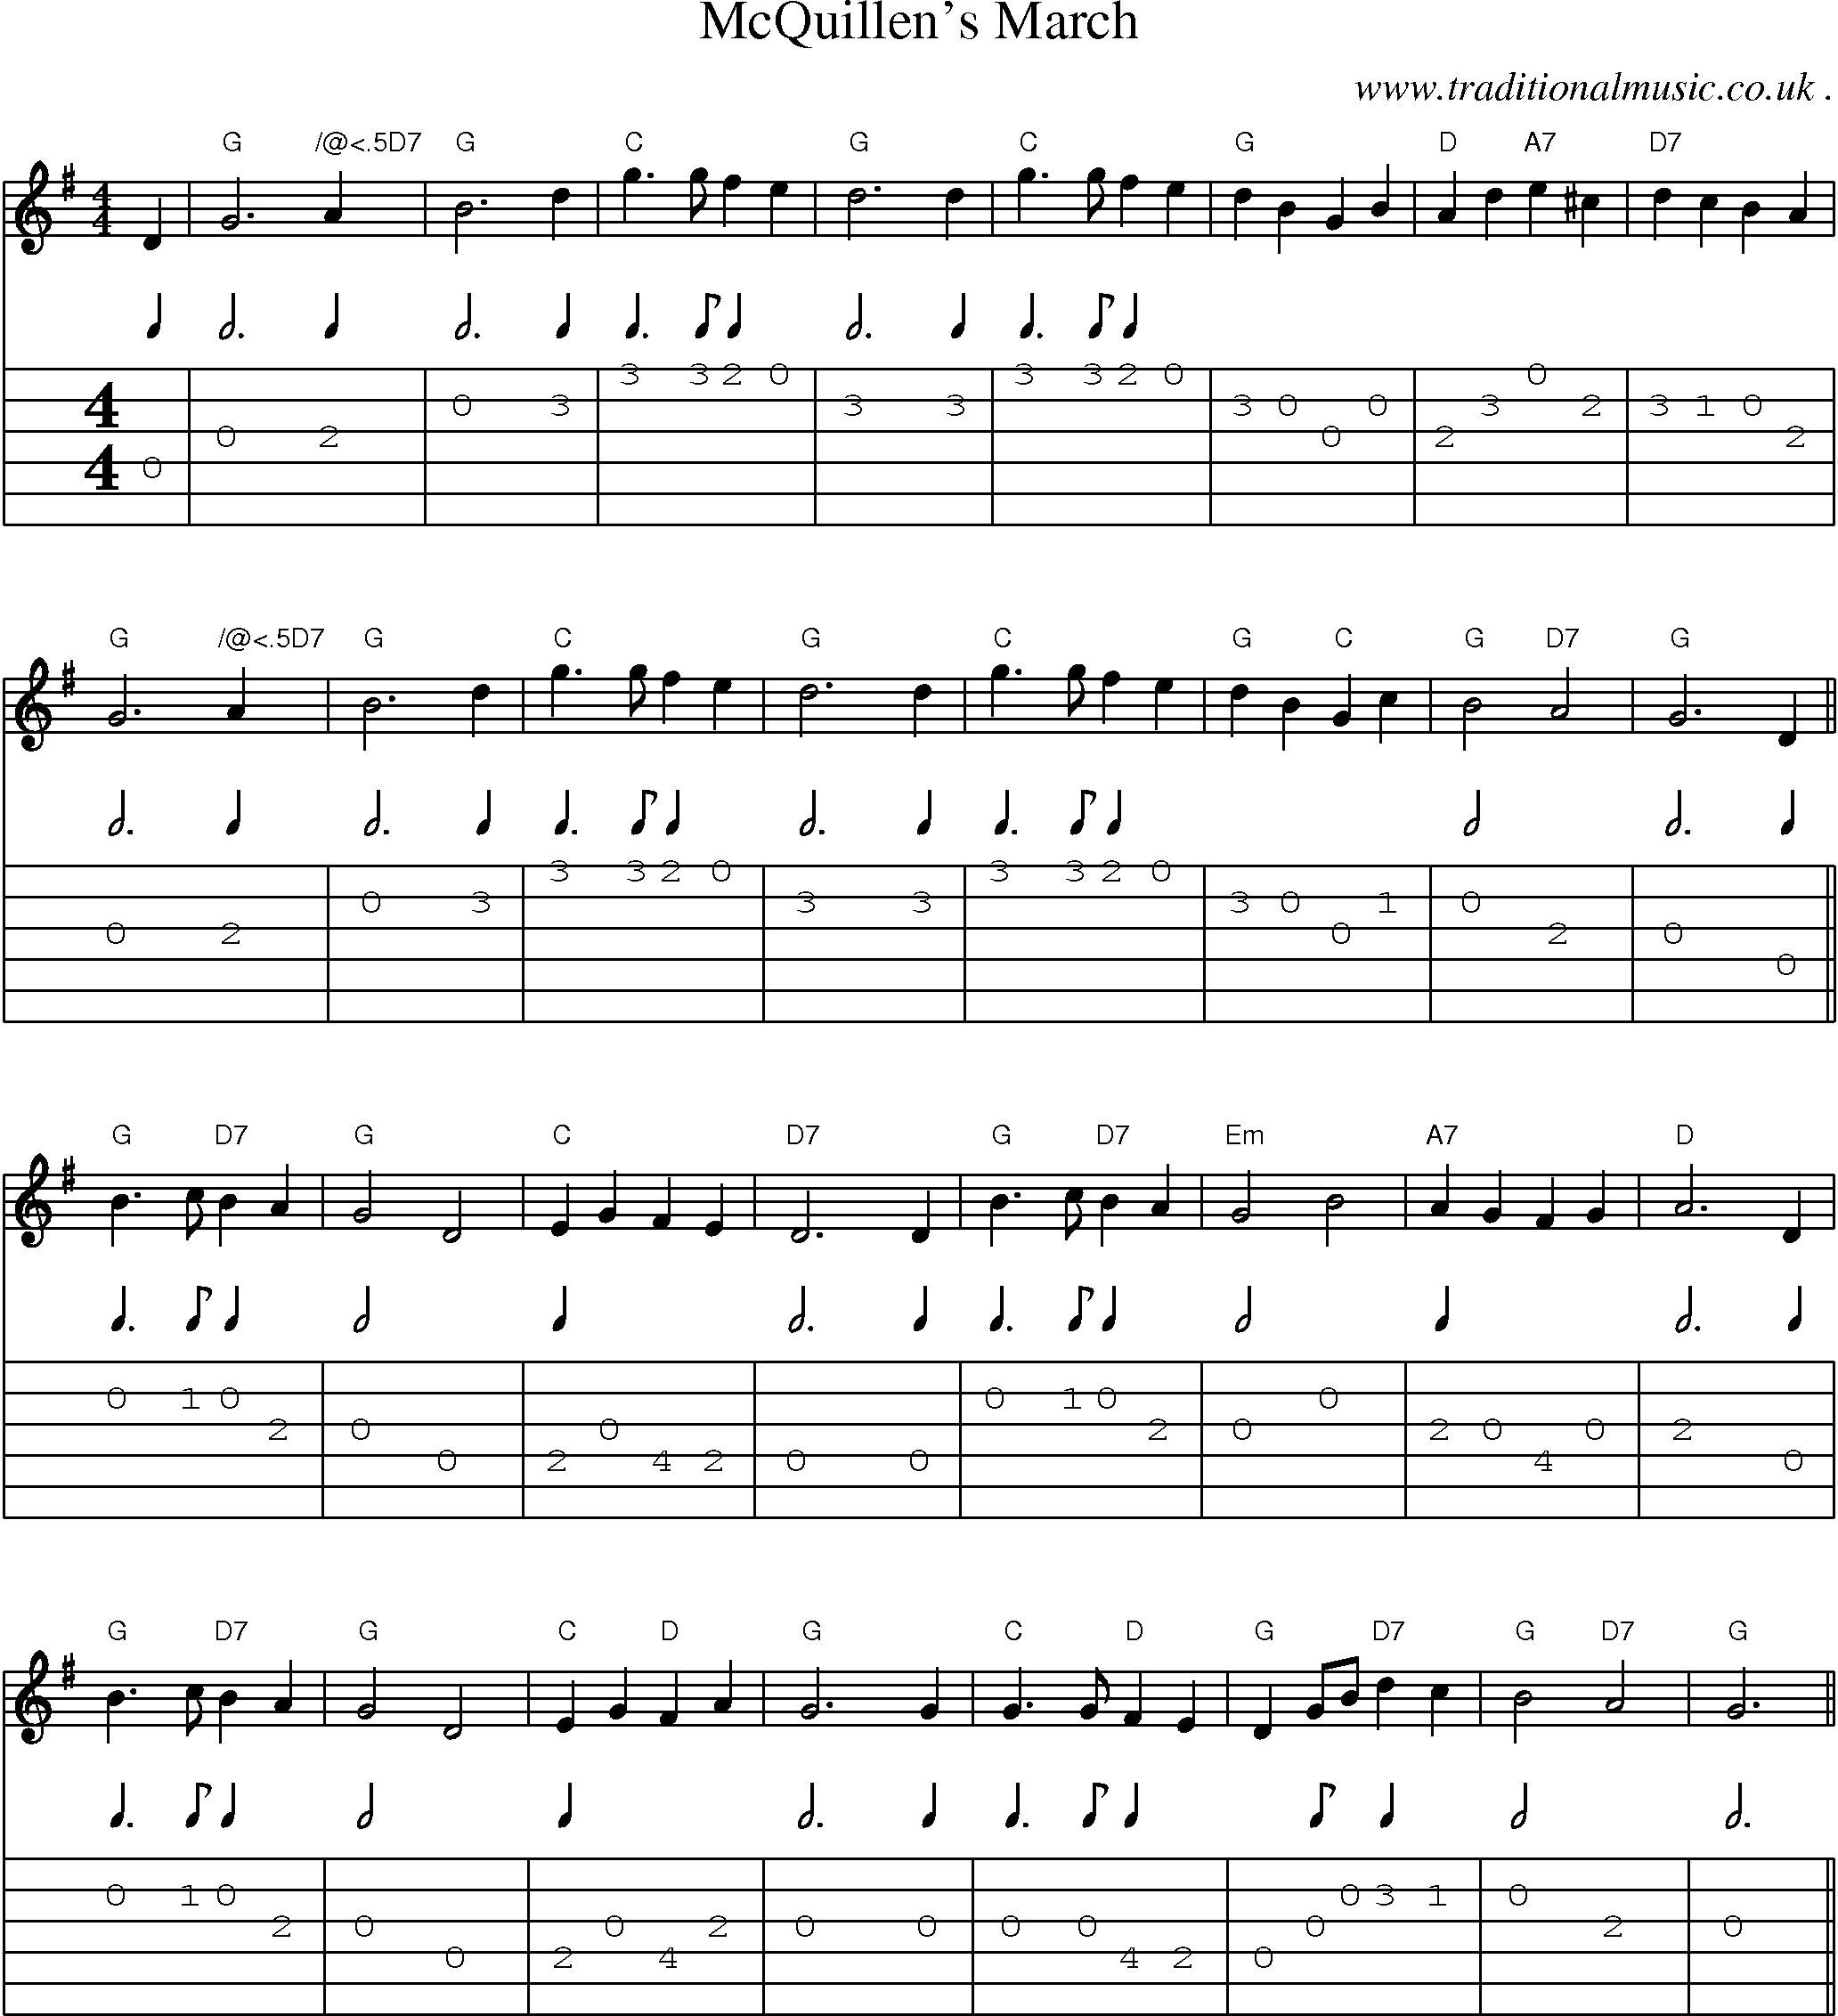 Sheet-Music and Guitar Tabs for Mcquillens March